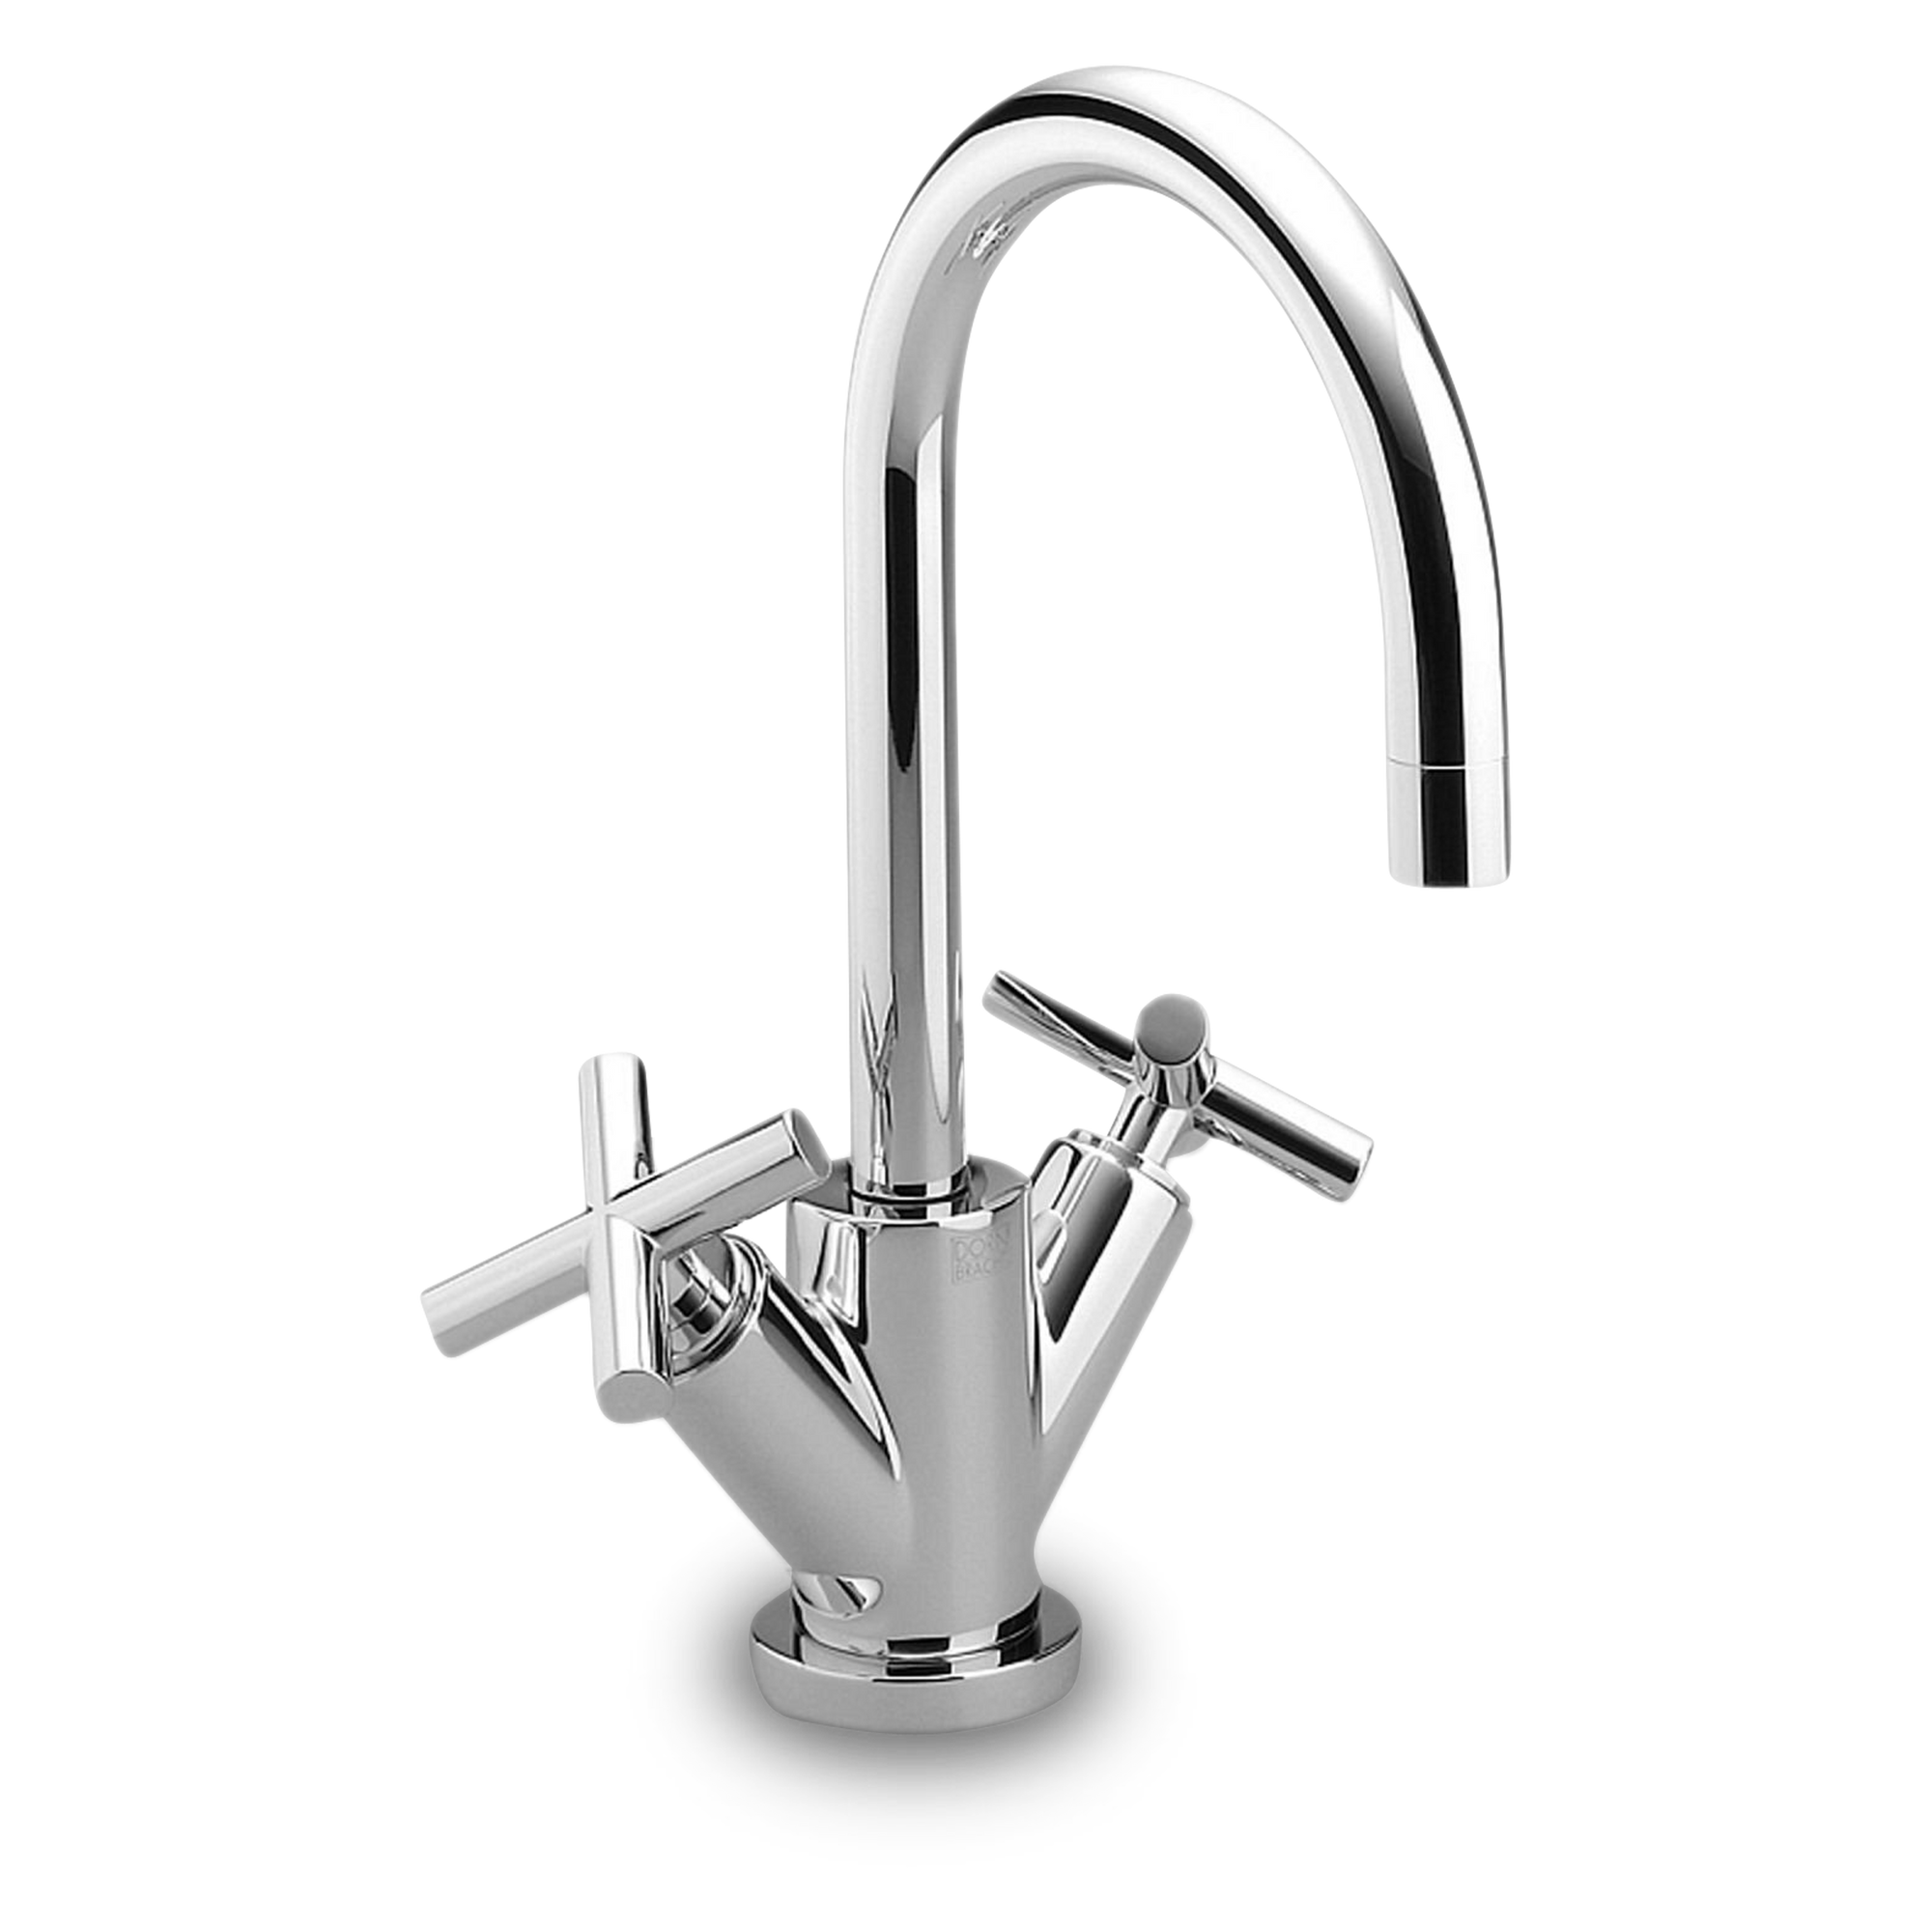 Single-hole basin faucet with two cross handles.